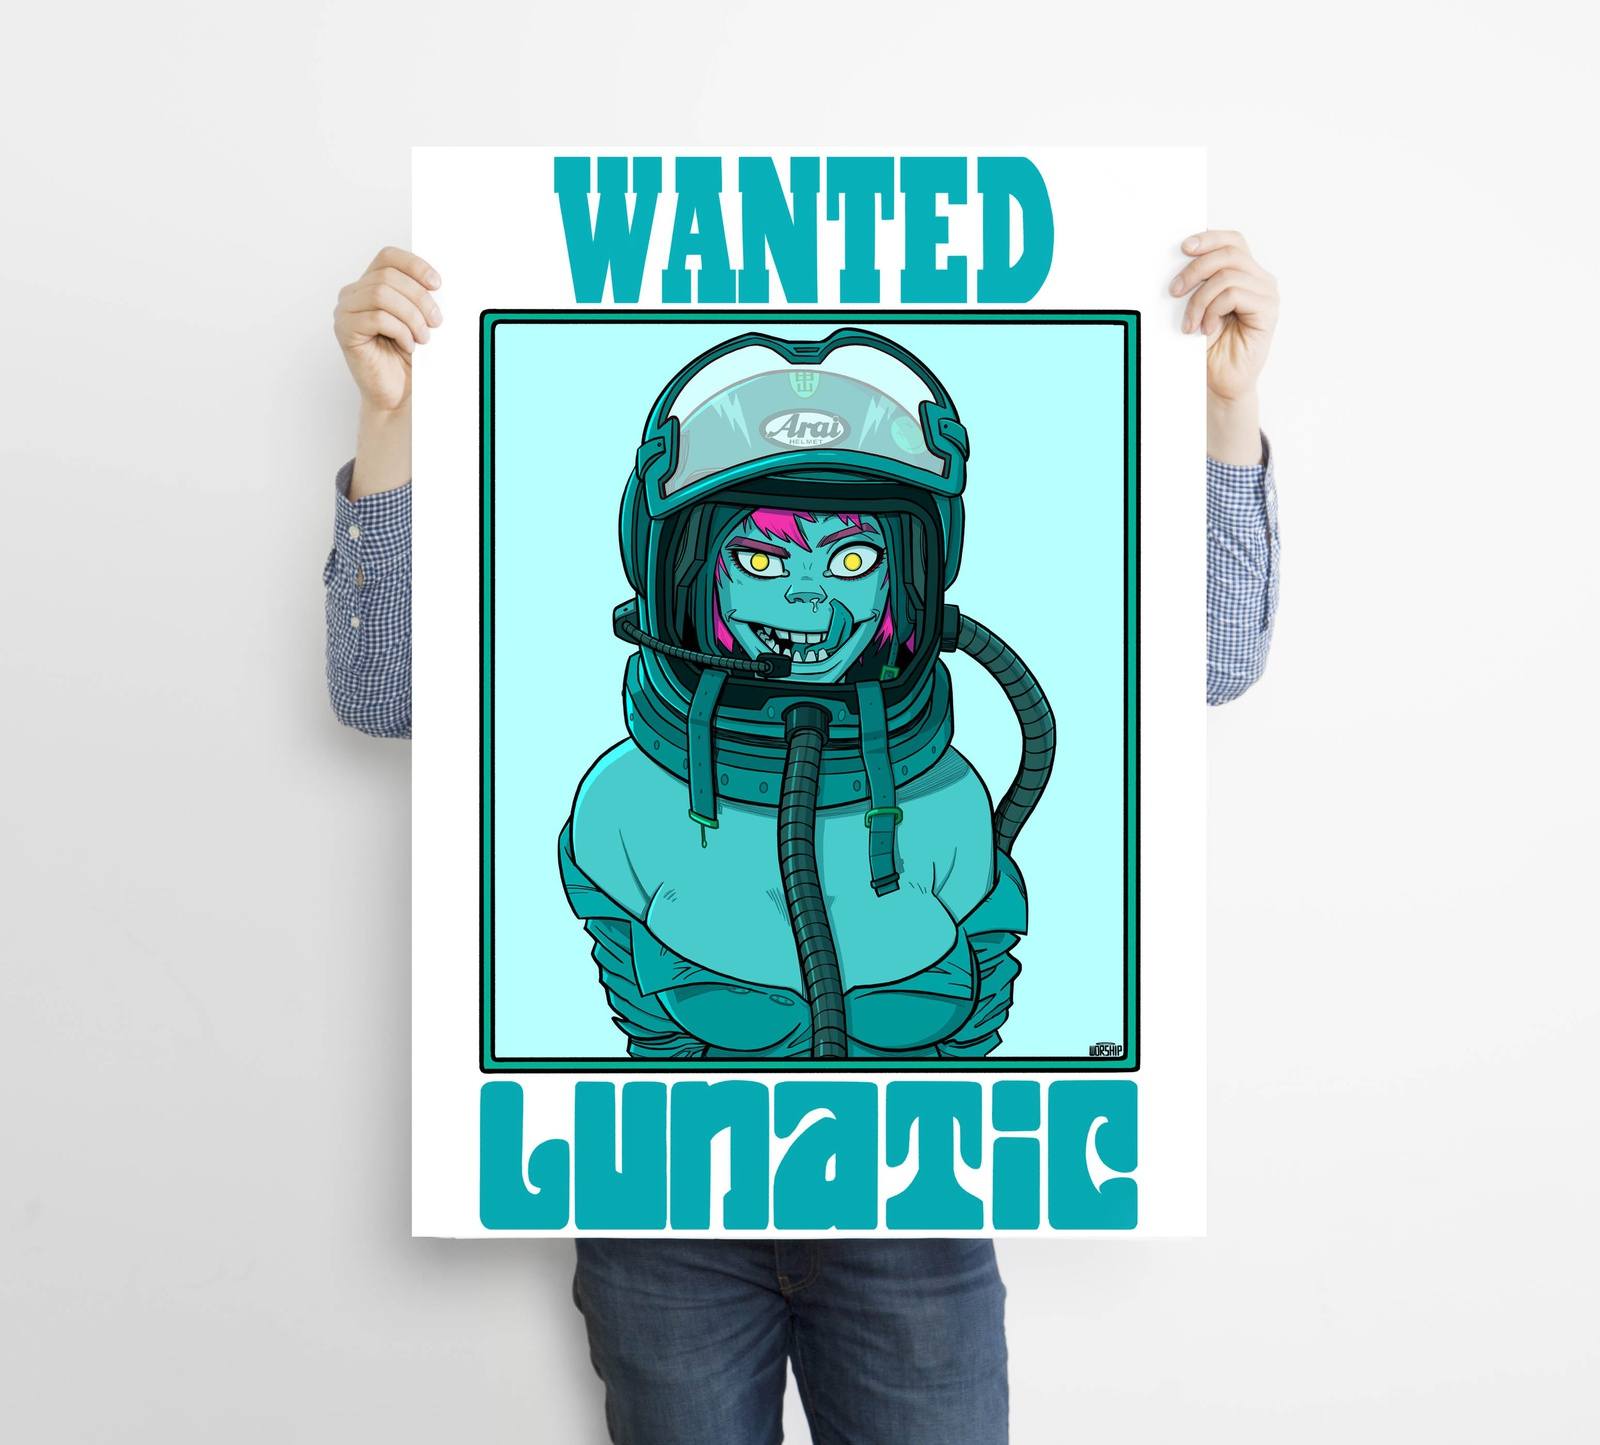 Unique and cool Gorillaz-style lunatic poster/wall art illustration